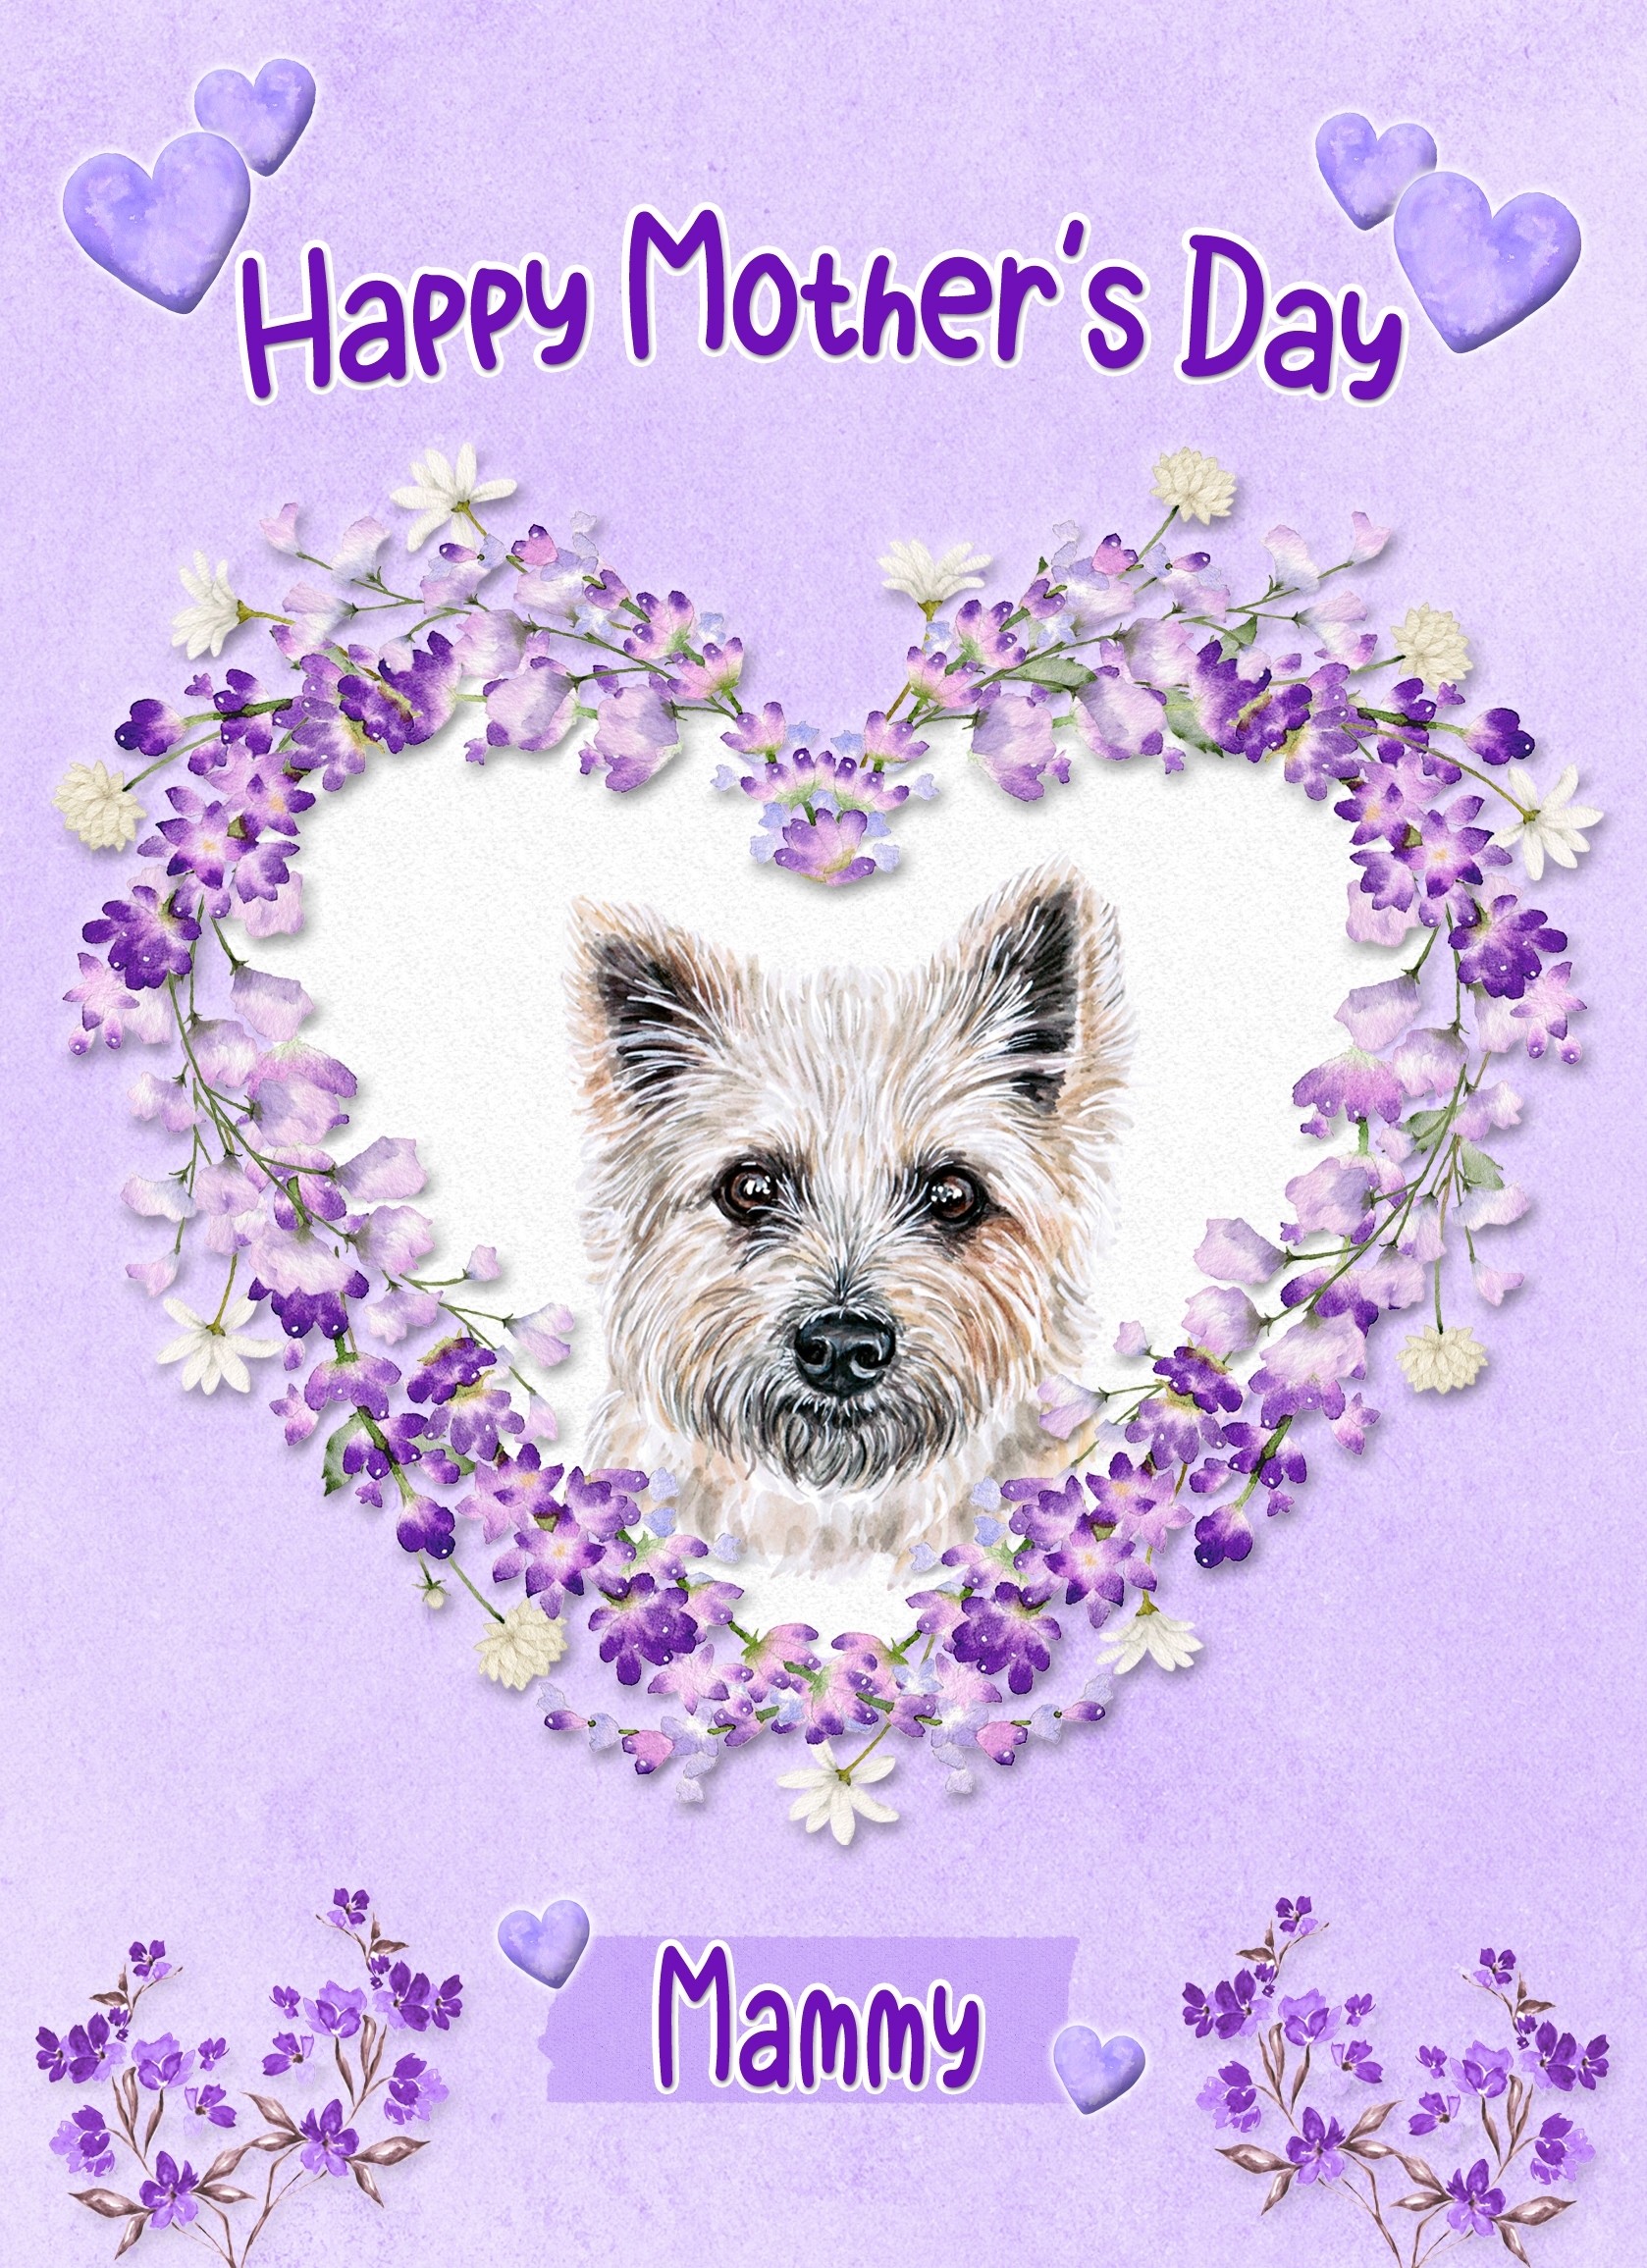 Cairn Terrier Dog Mothers Day Card (Happy Mothers, Mammy)